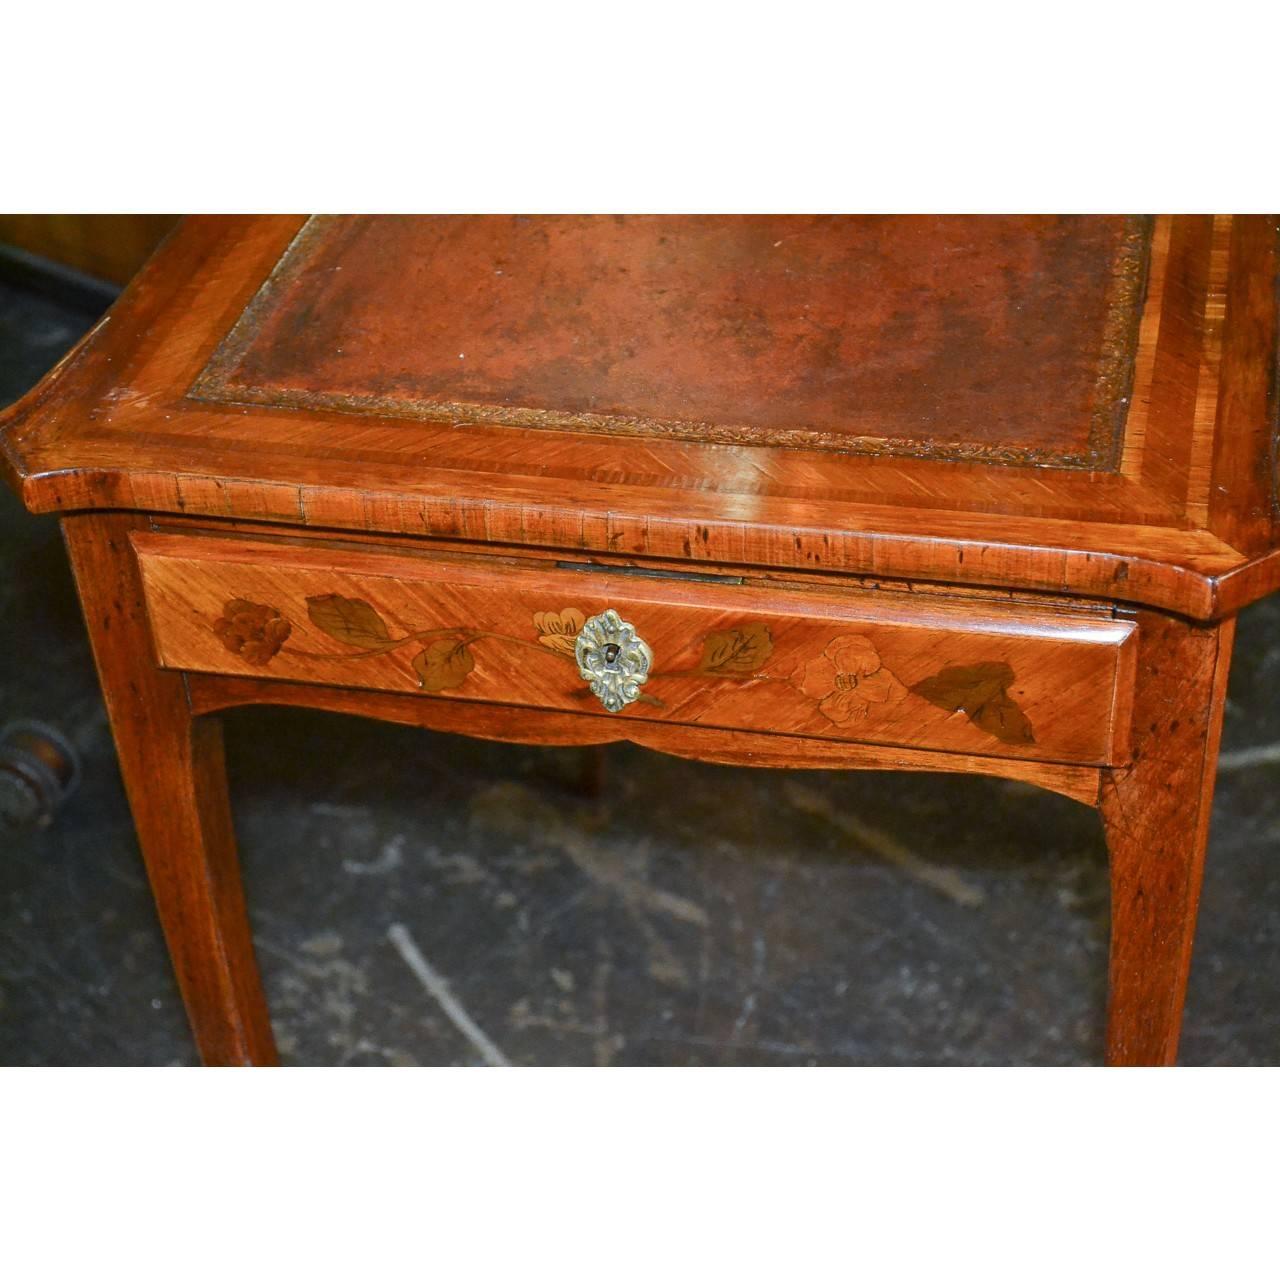 Fine French Louis XV side table with beautiful leather top, circa 1870.
Made of much sought after kingwood. One drawer.
A jewel!

Measure: 25 inches wide x 26 inches height x 18 inches deep.